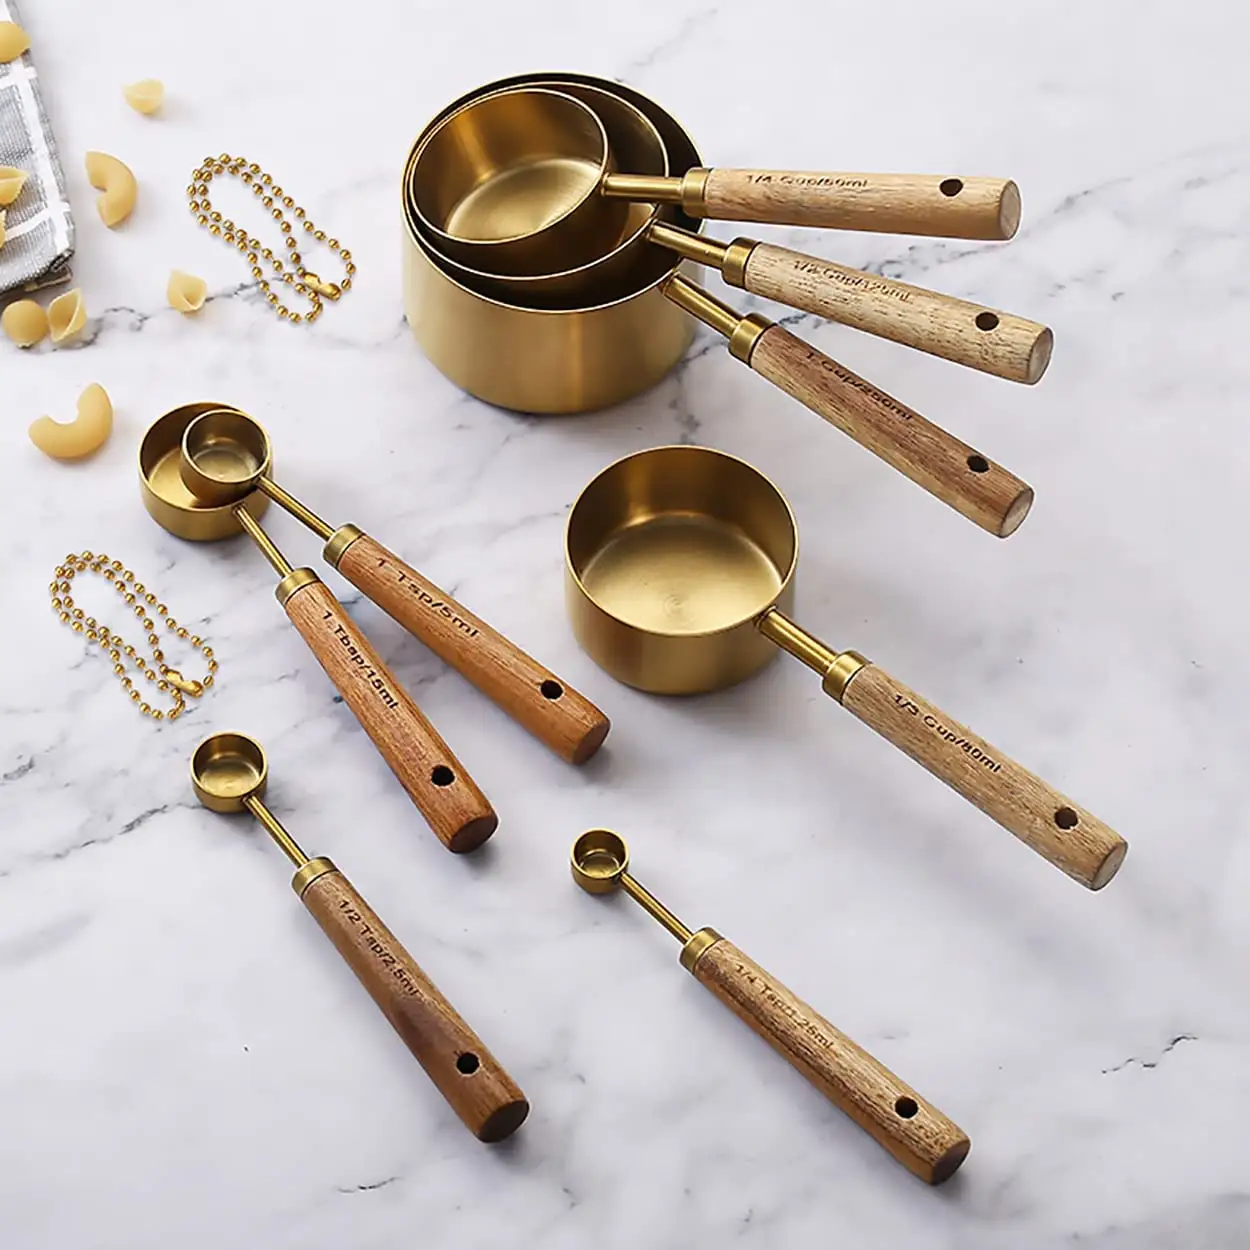 8pcs Premium kitchen accessories baking tools wood handle copper stainless steel measuring cup and spoon set